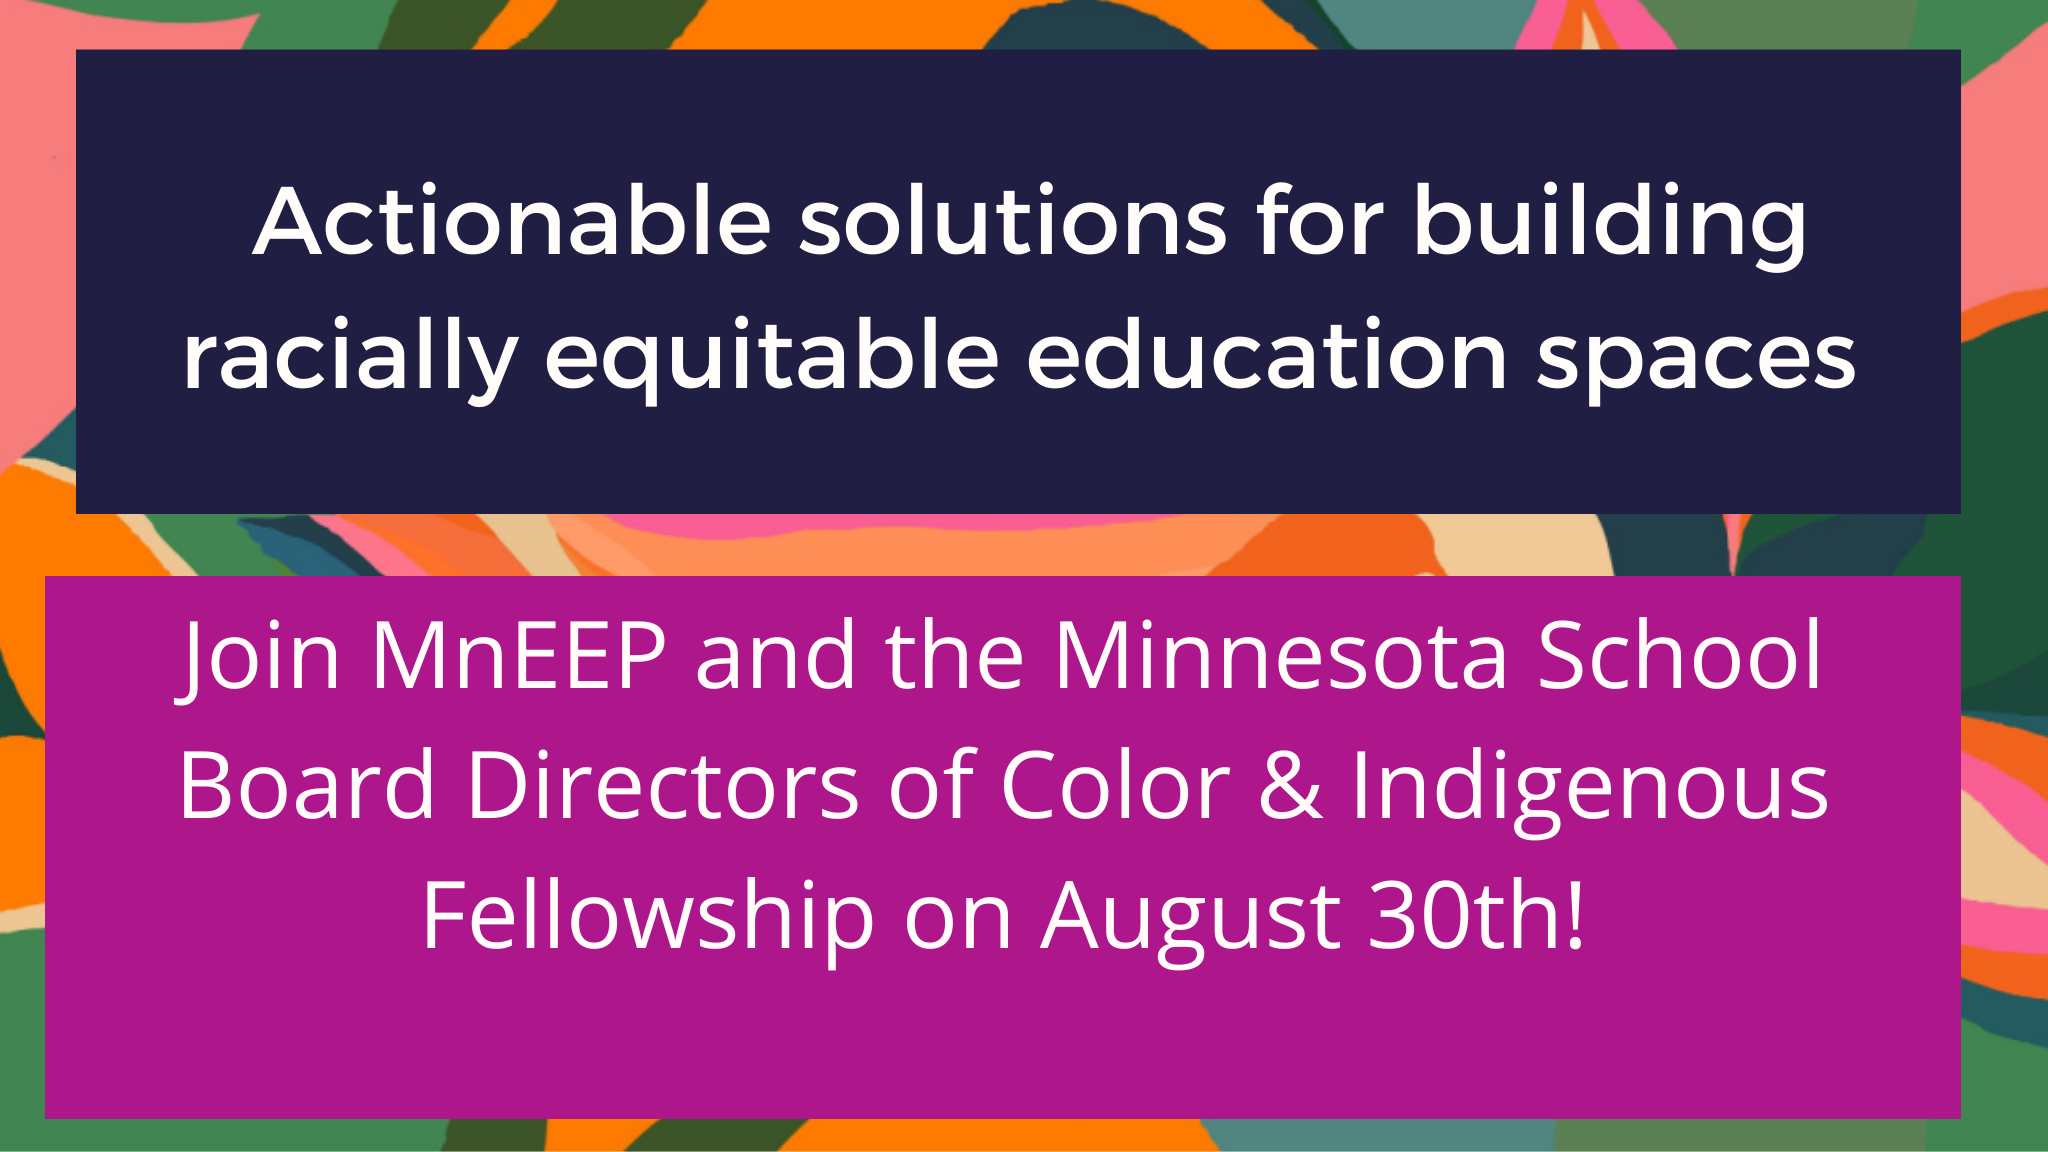 Building successful models for education equity